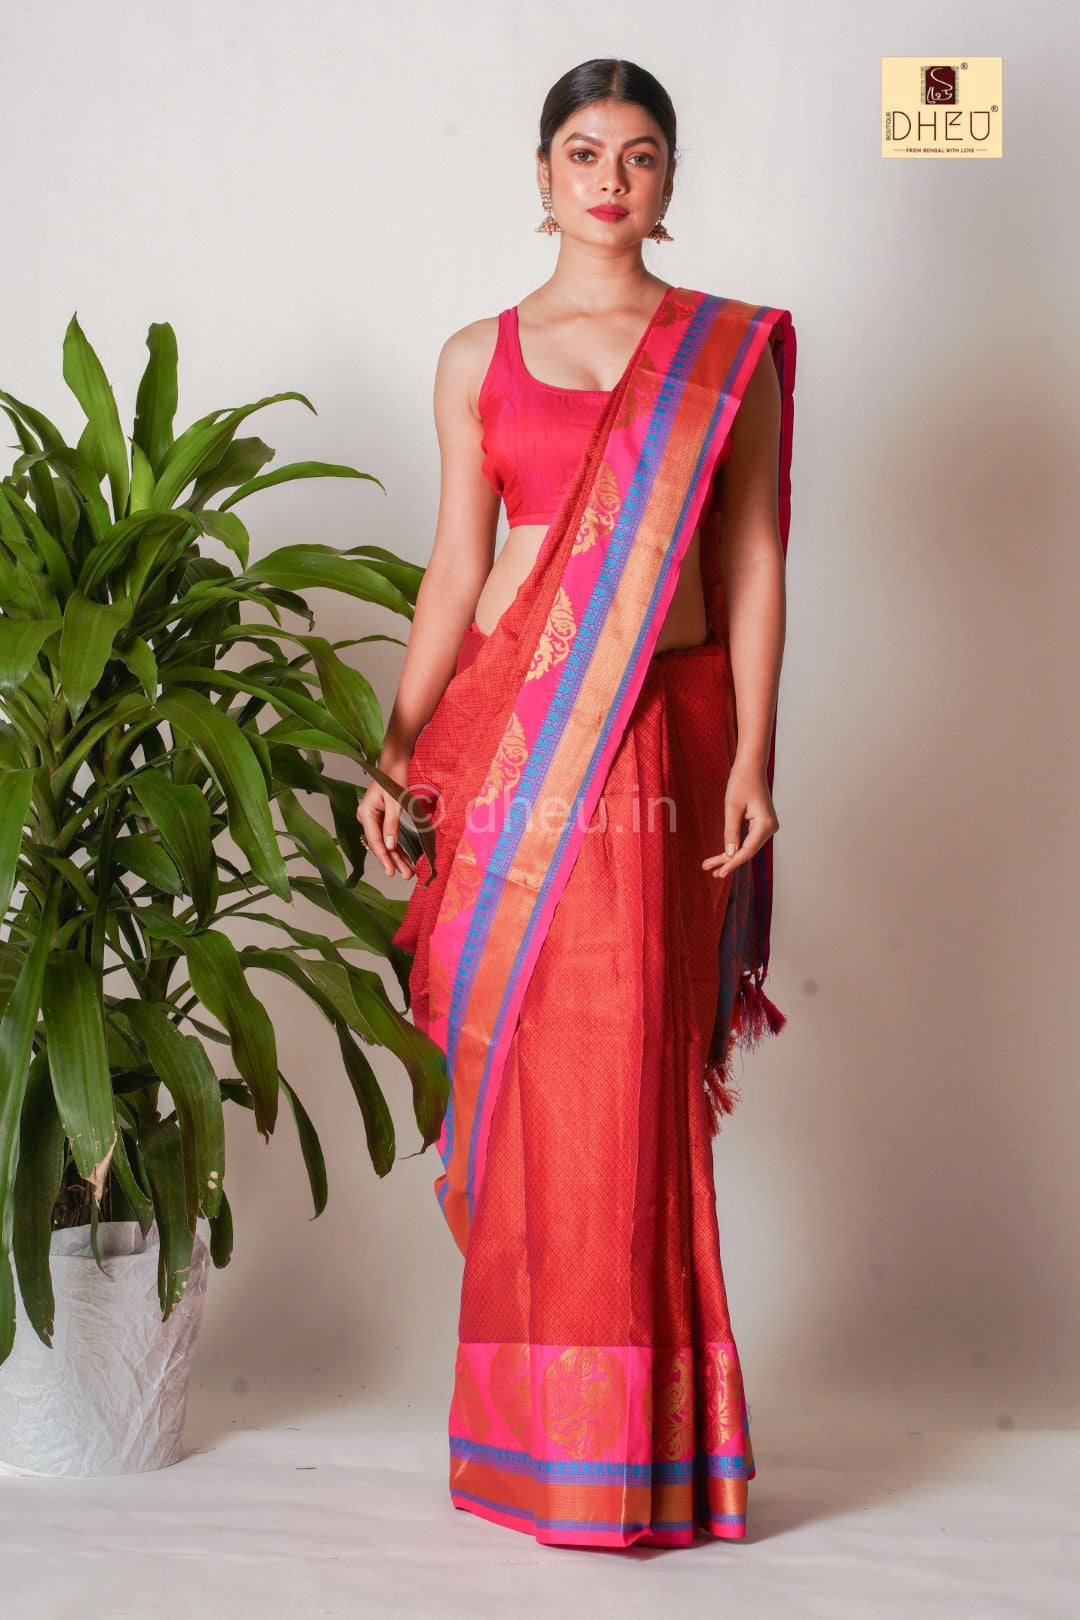 Designer handloom brocade silk saree at lowest cost only at dheu.in